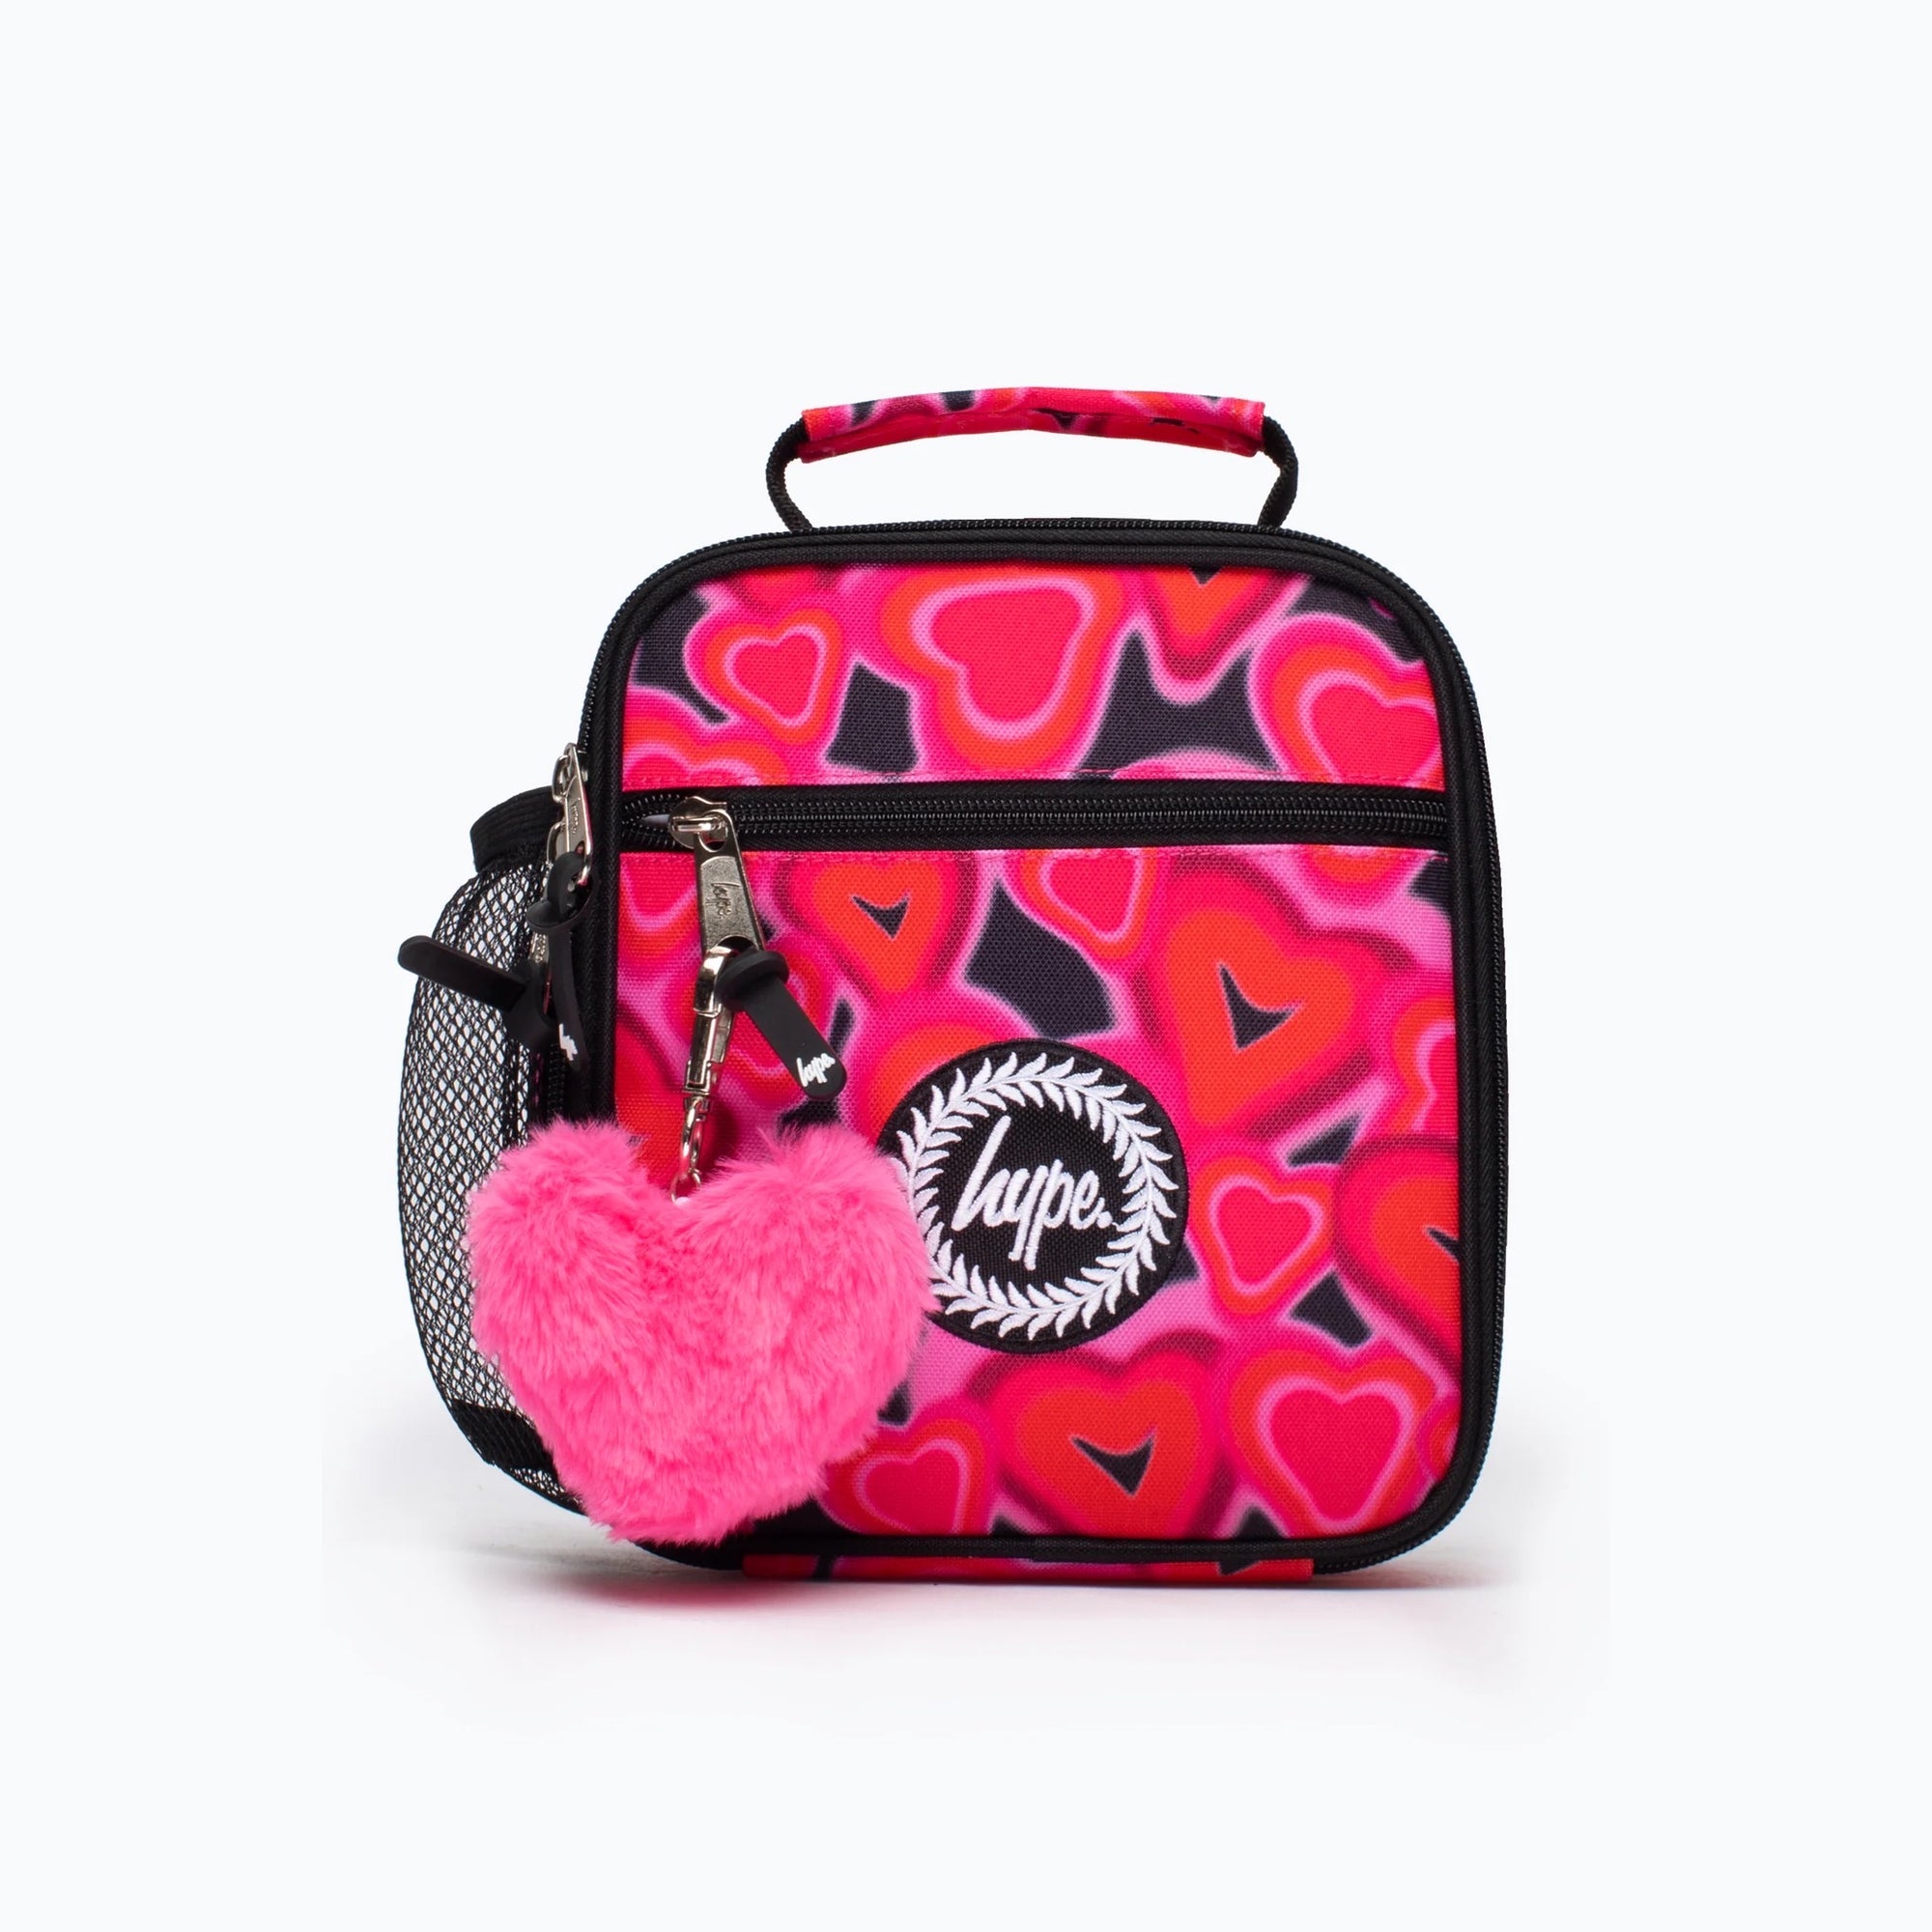 Hype Spray Hearts Lunch Bag Yucb110 Accessories ONE SIZE / Pink